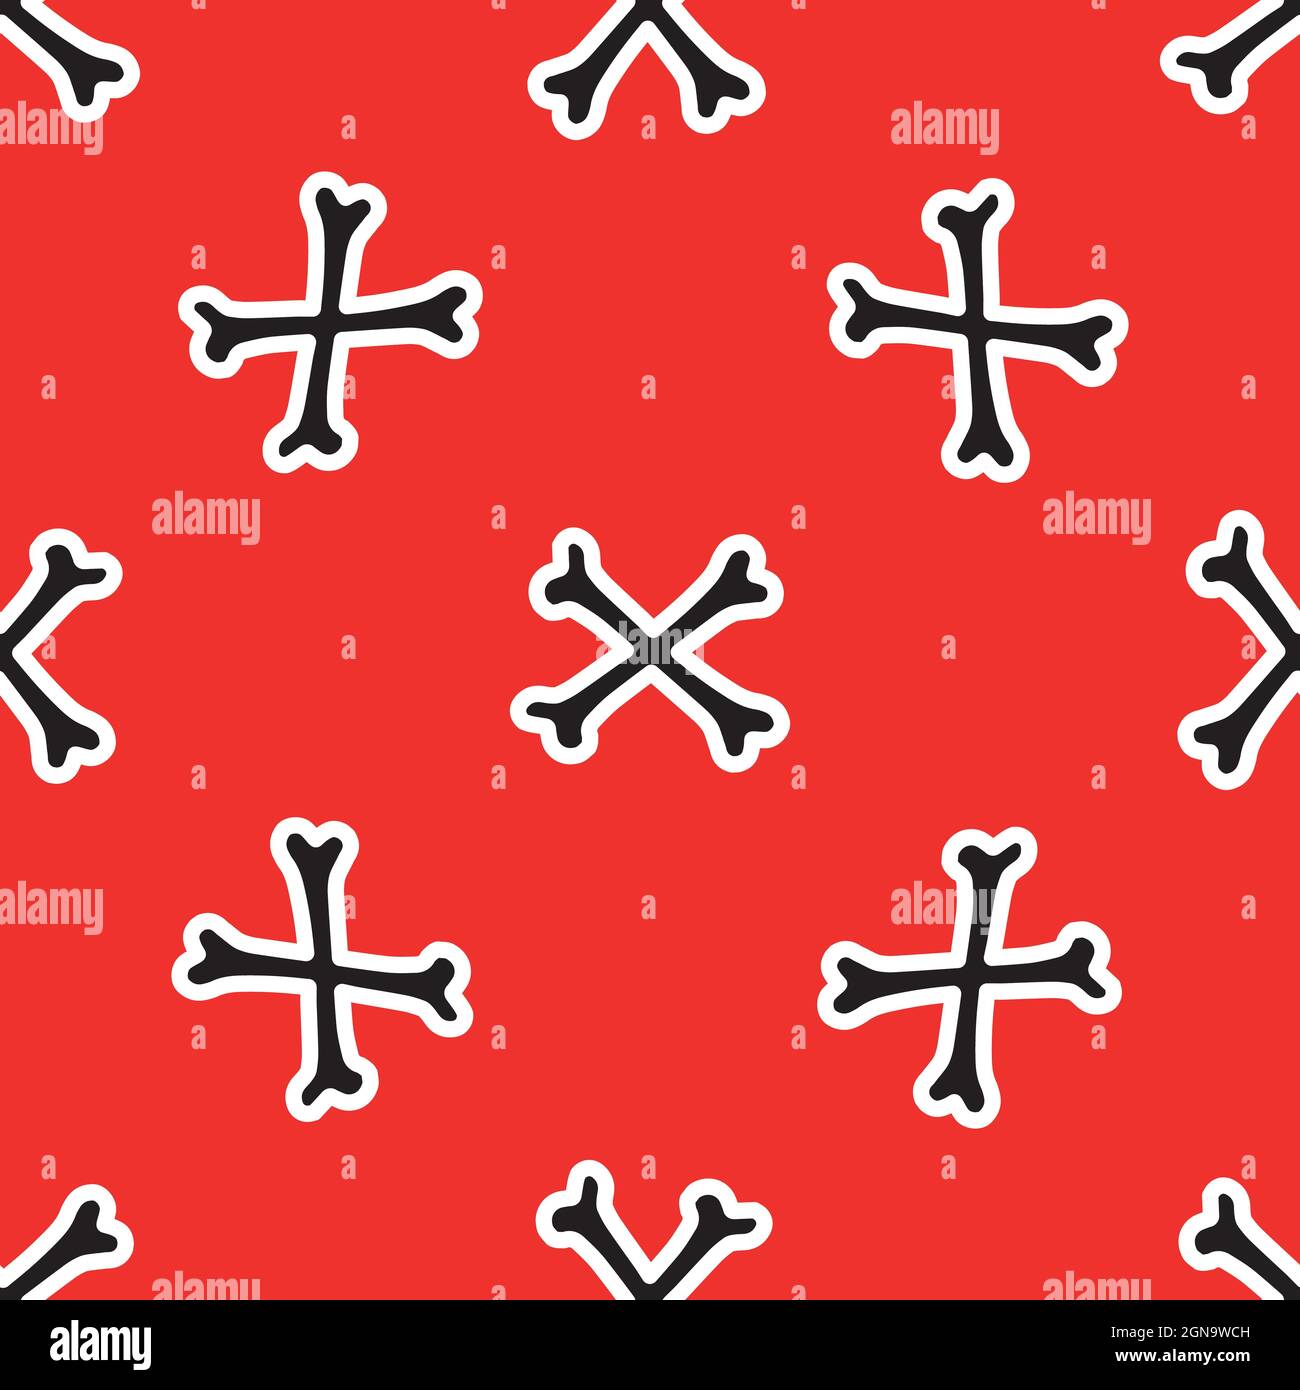 Seamless pattern with bones on a red background.  Stock Vector